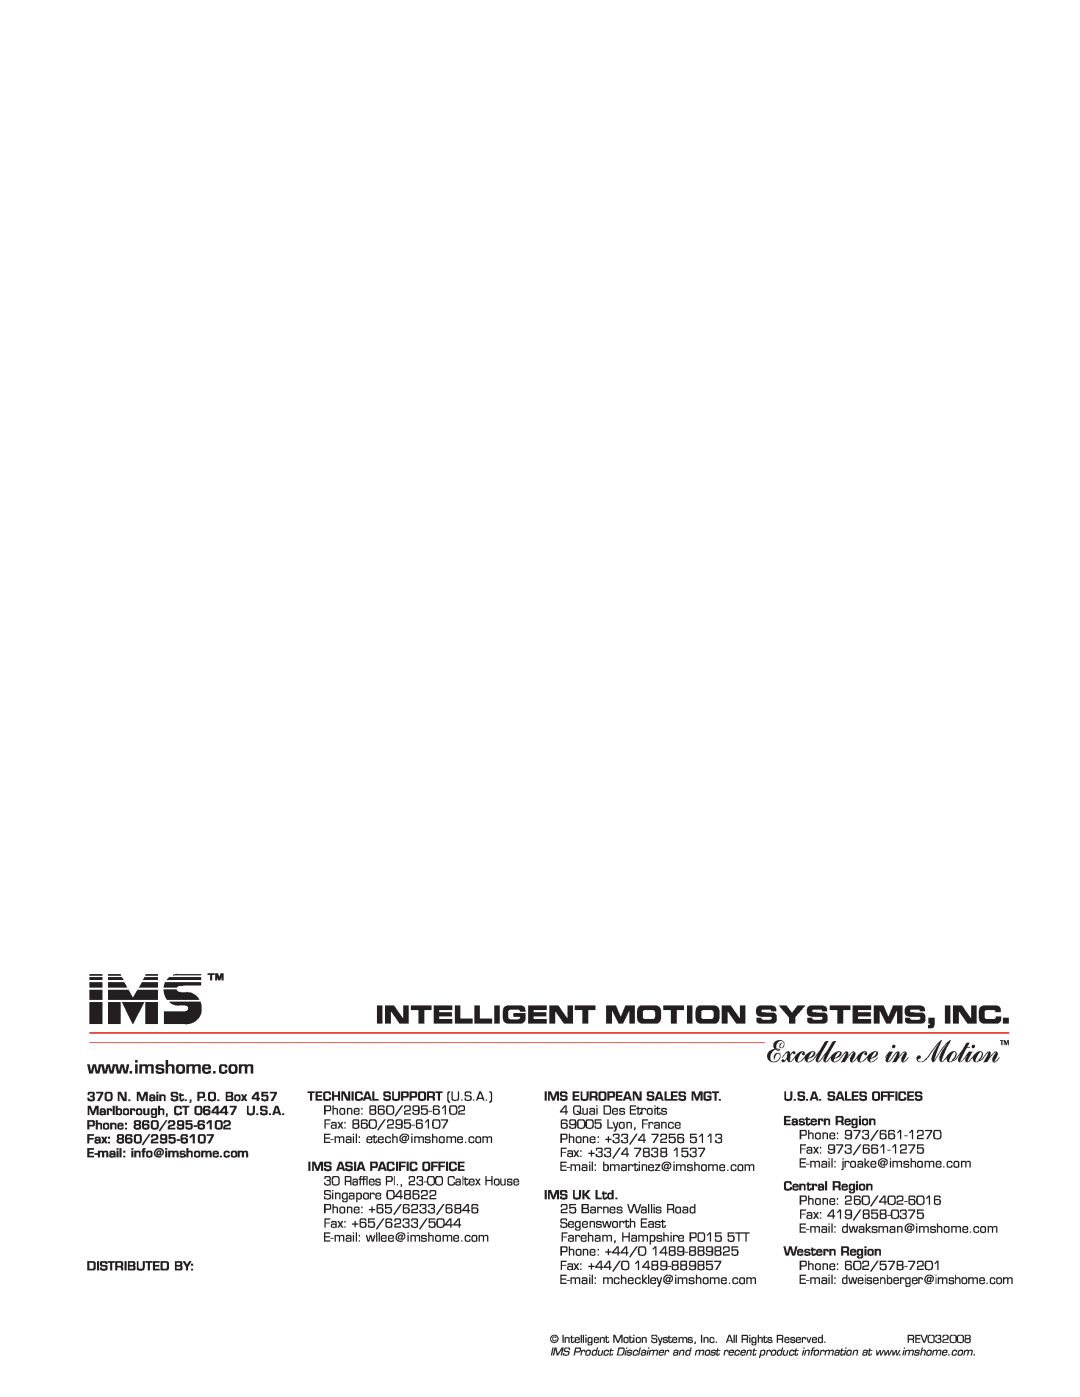 Intelligent Motion Systems Motion Detector operating instructions Excellence in Motion, intelligent motion systems, INC 